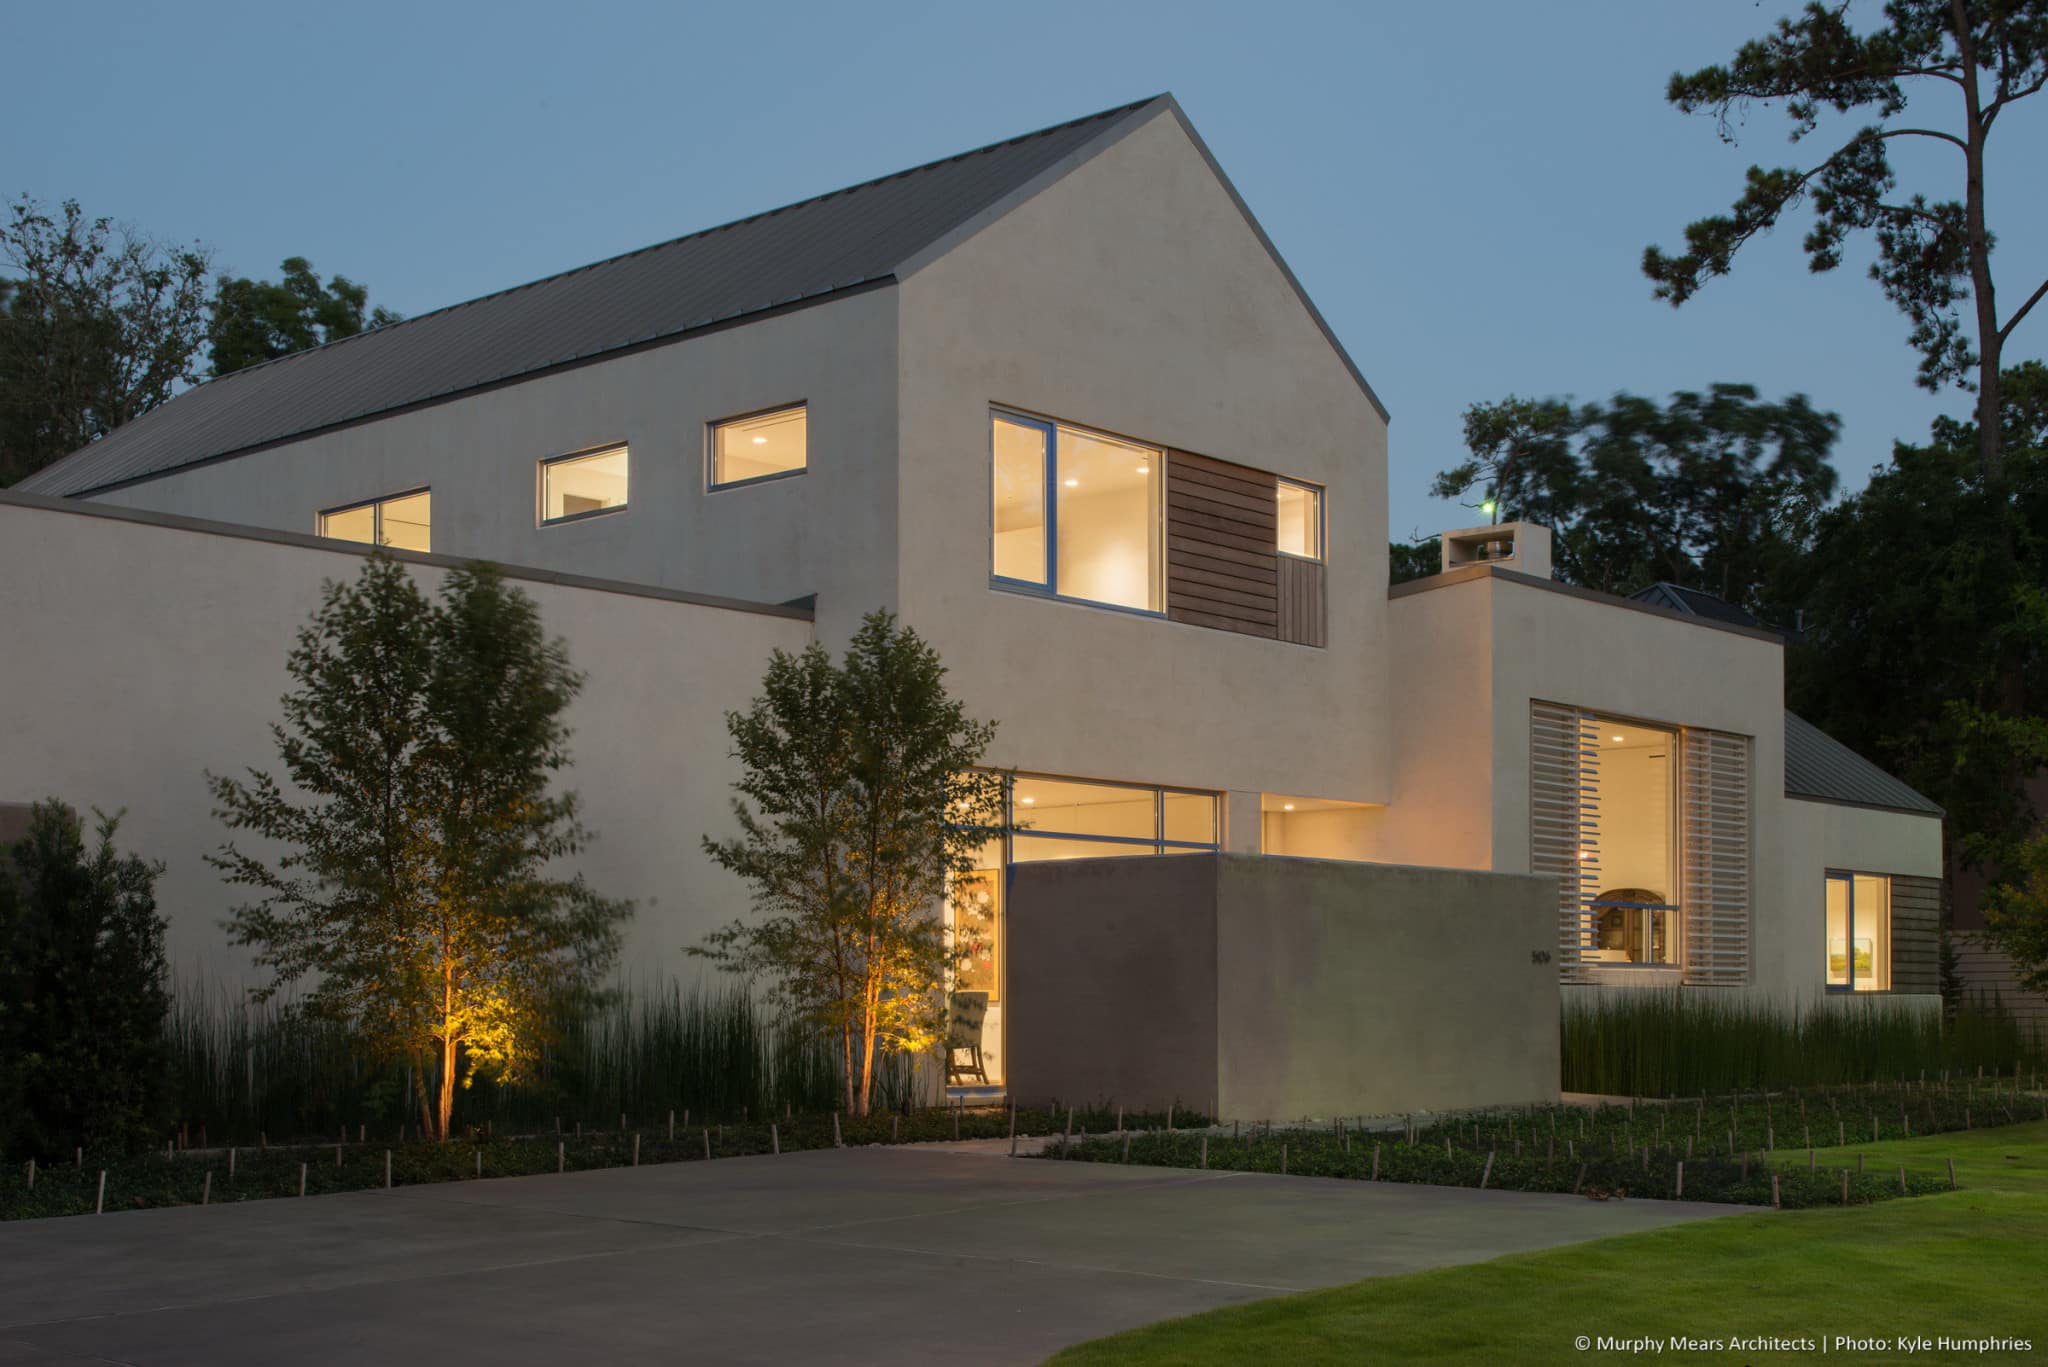 Modeled exterior stucco and interior plaster finishes under balanced light at dusk reveal the volumes within the AAC block home.